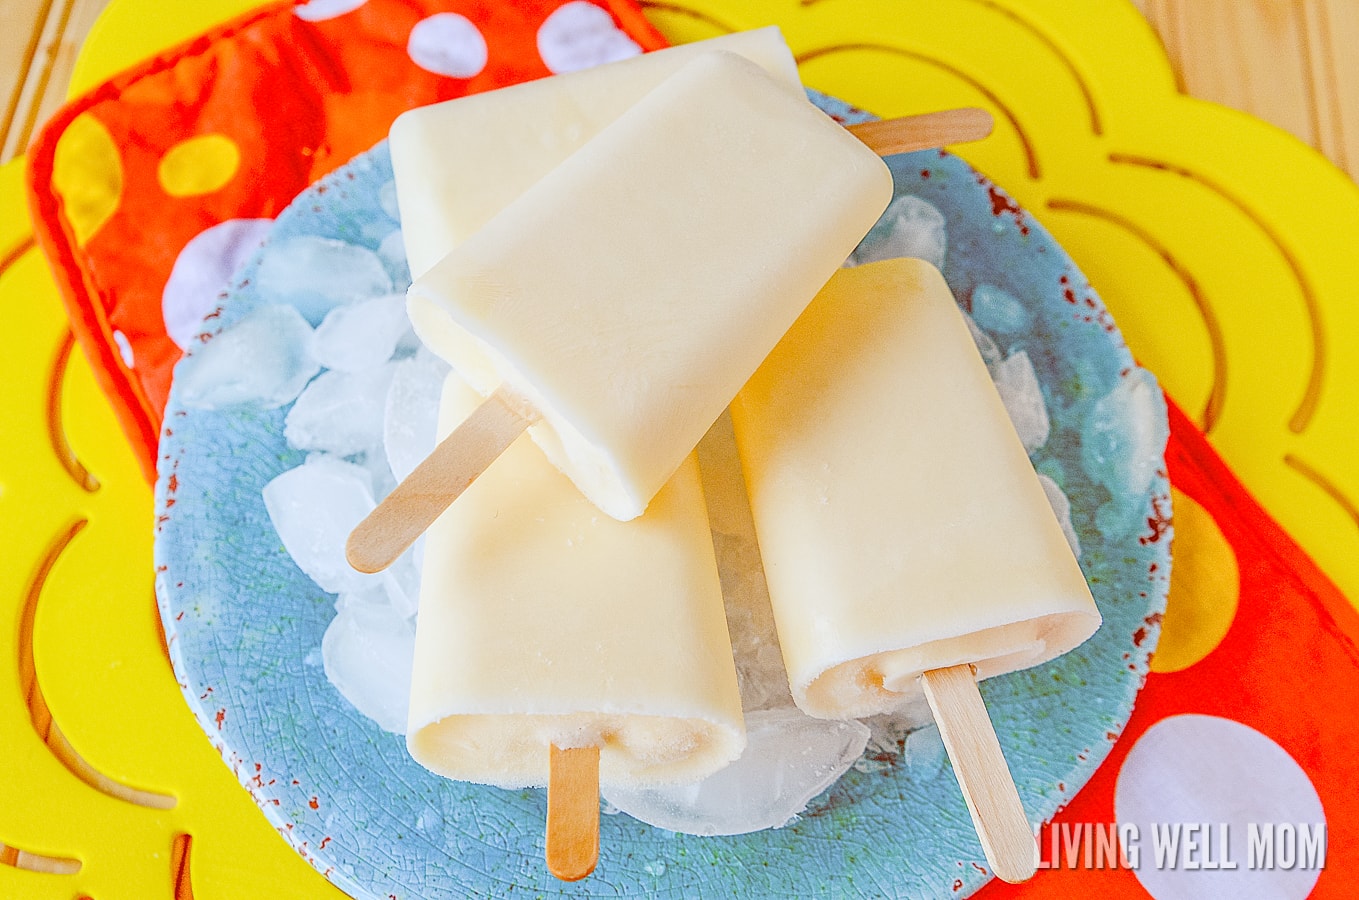 These Orange Yogurt Popsicles are unbelievably easy to make and a satisfying nutritious snack kids of all ages will love. And you’ll love how this simple recipe will fill them up, thanks to the added protein from the yogurt!